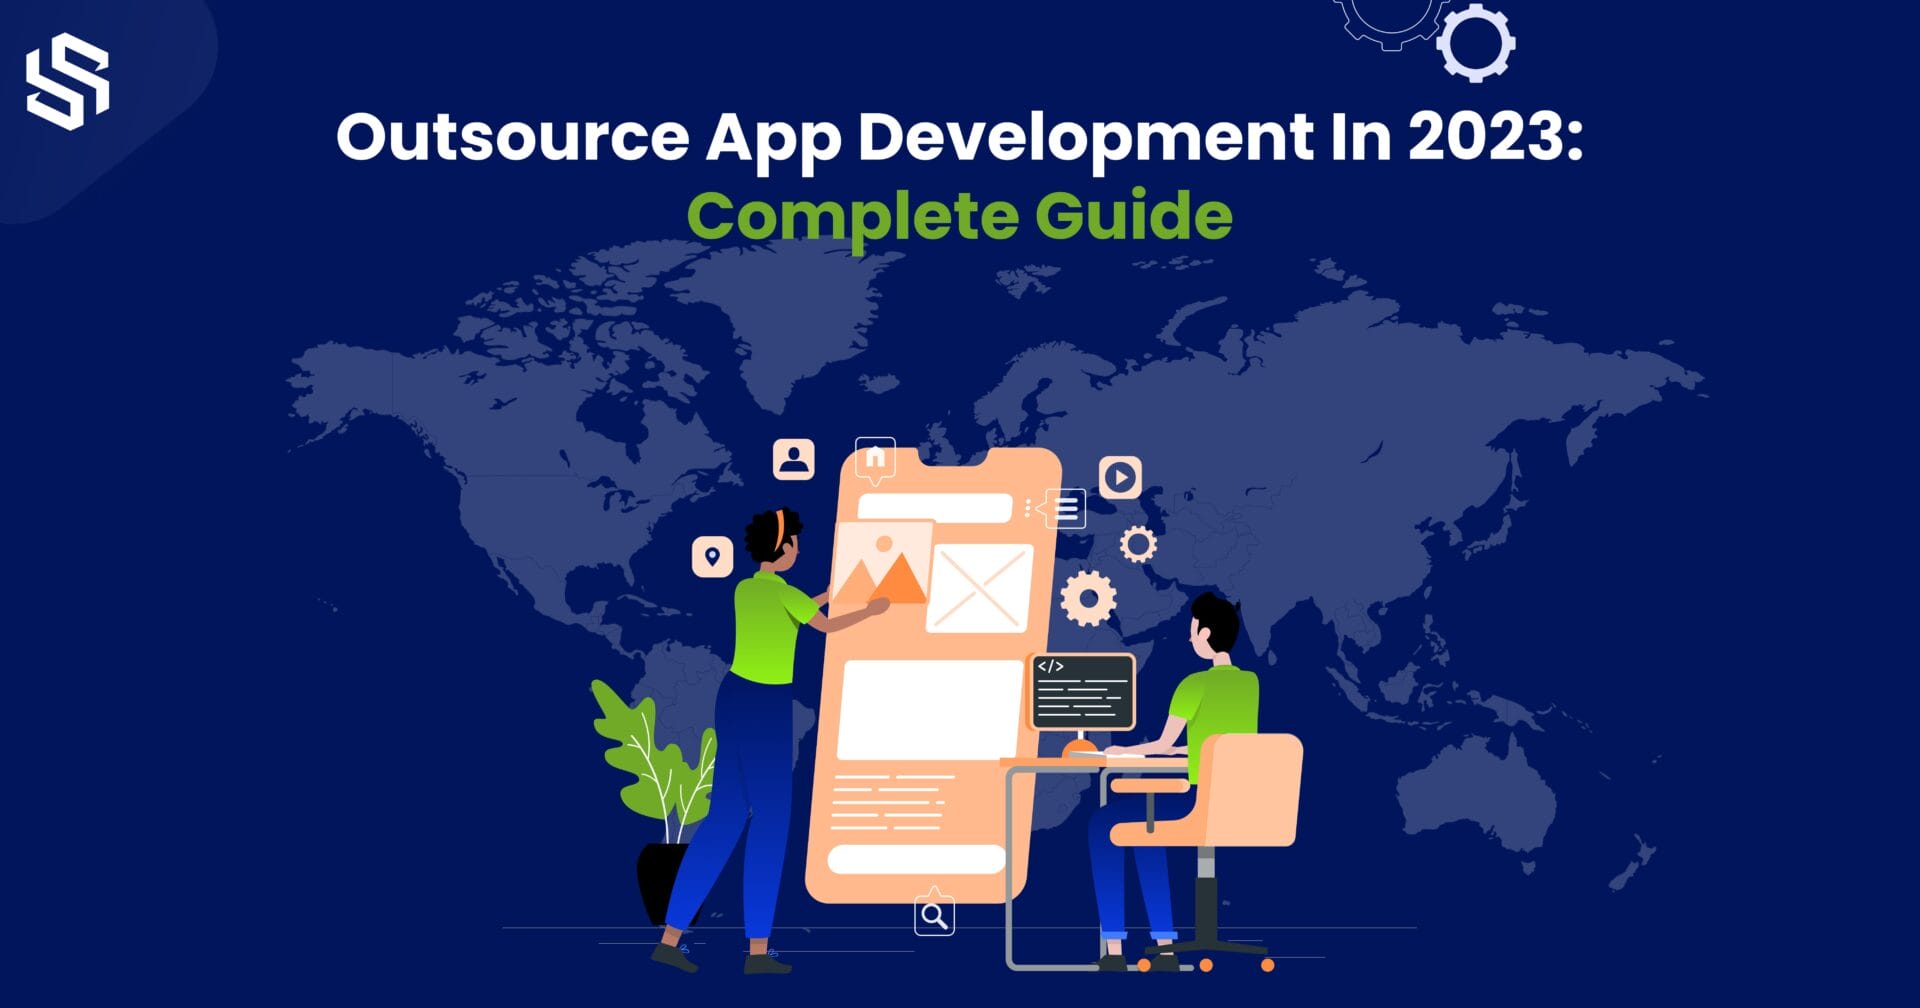 Outsource App Development in 2023 - Complete Guide